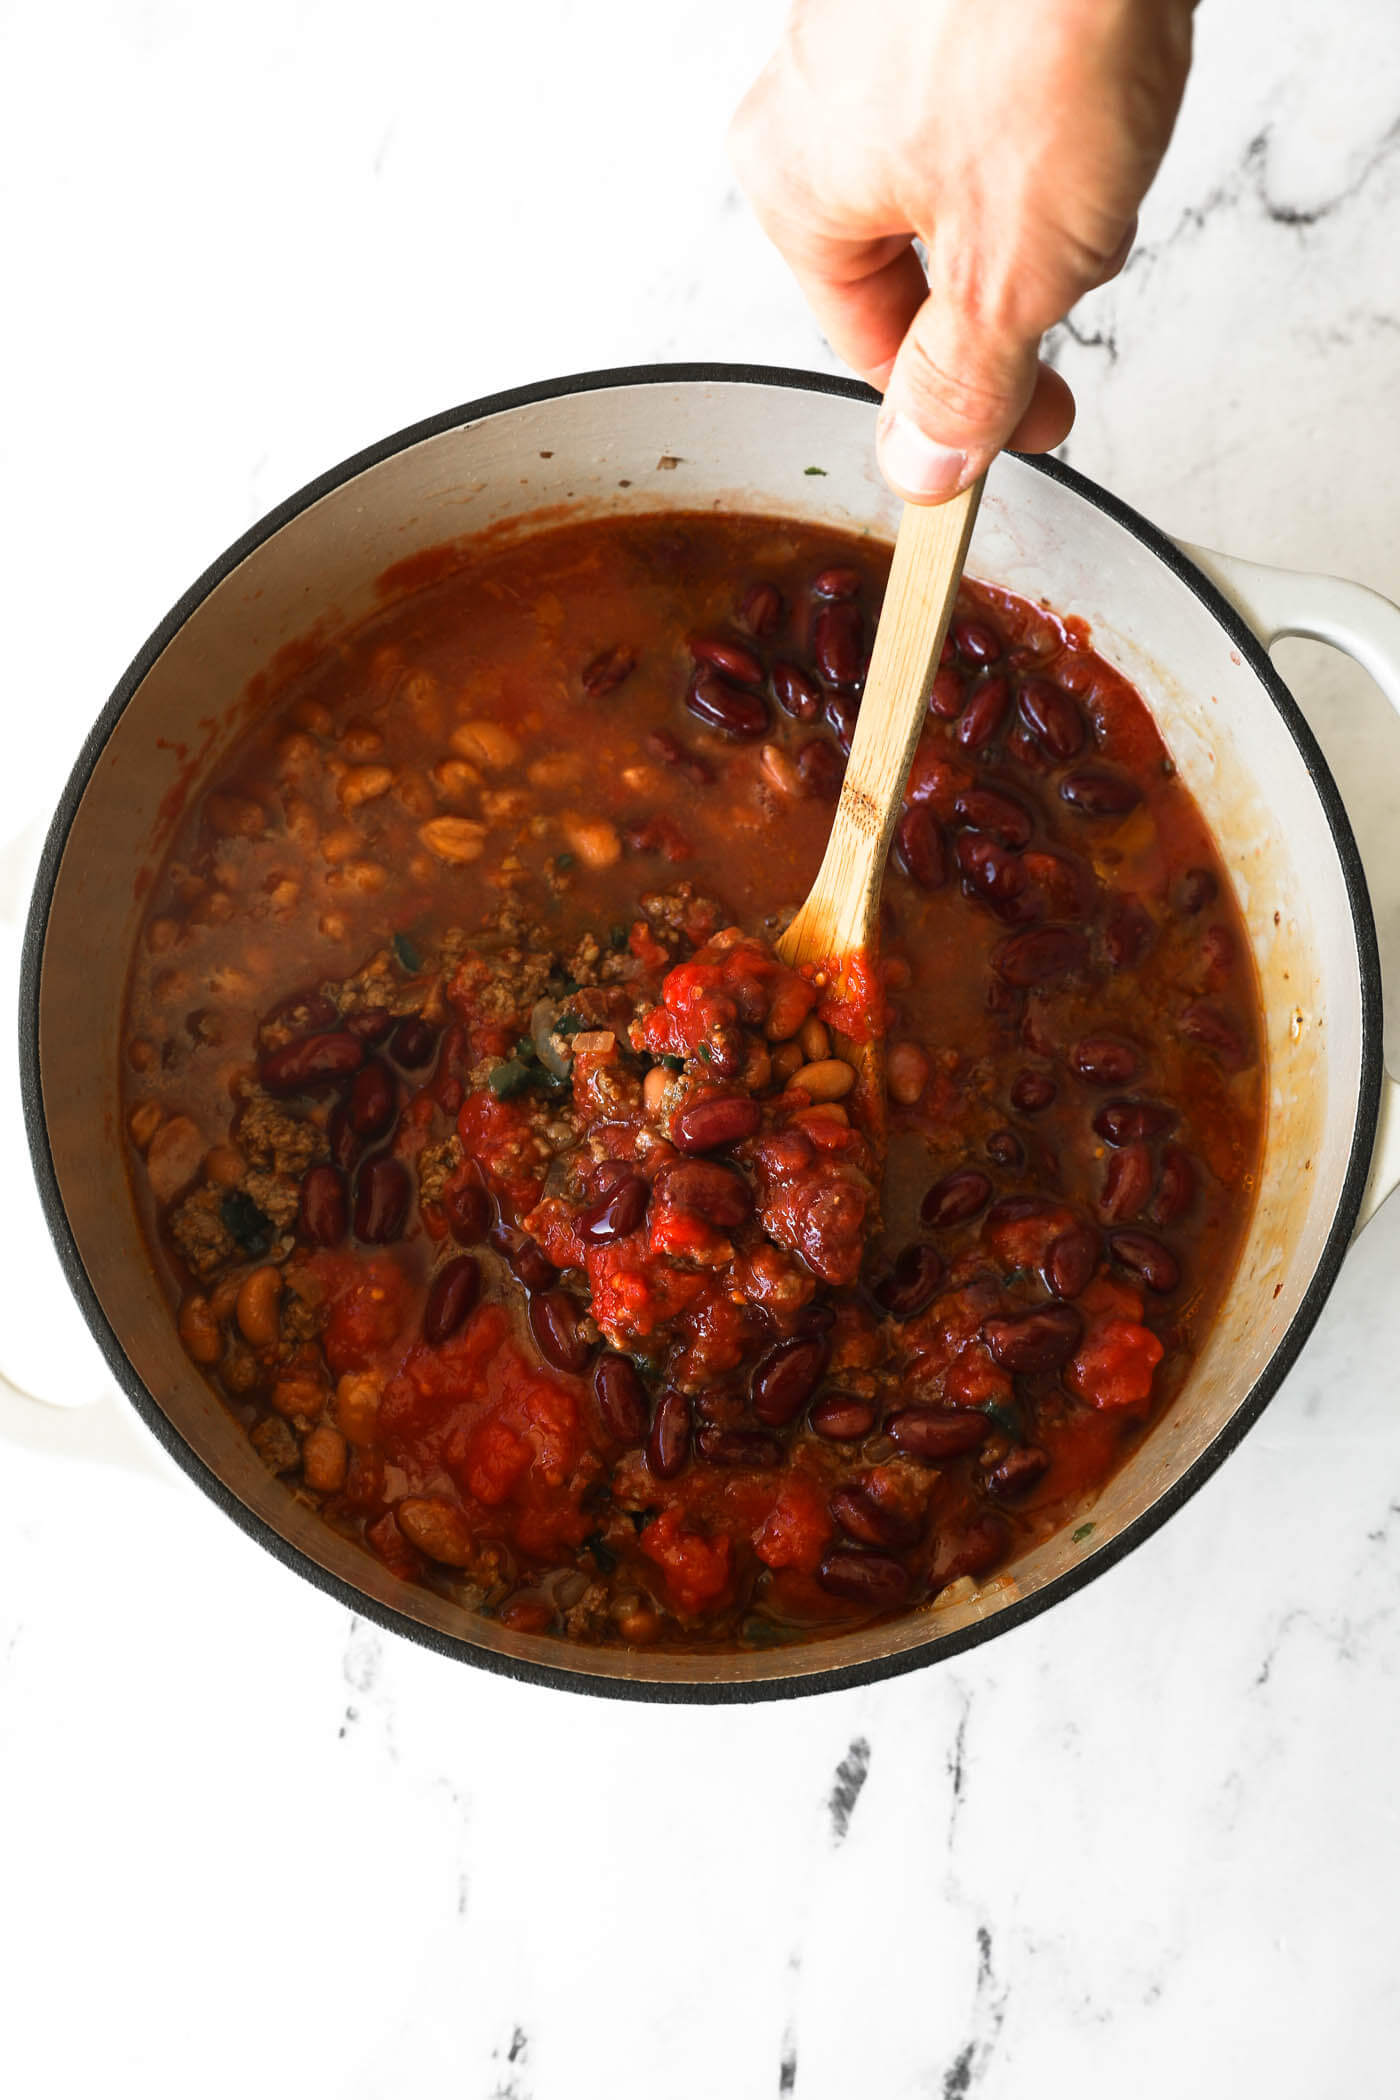 Stirring all of the chili ingredients together in a dutch oven before covering to simmer on the stove. 